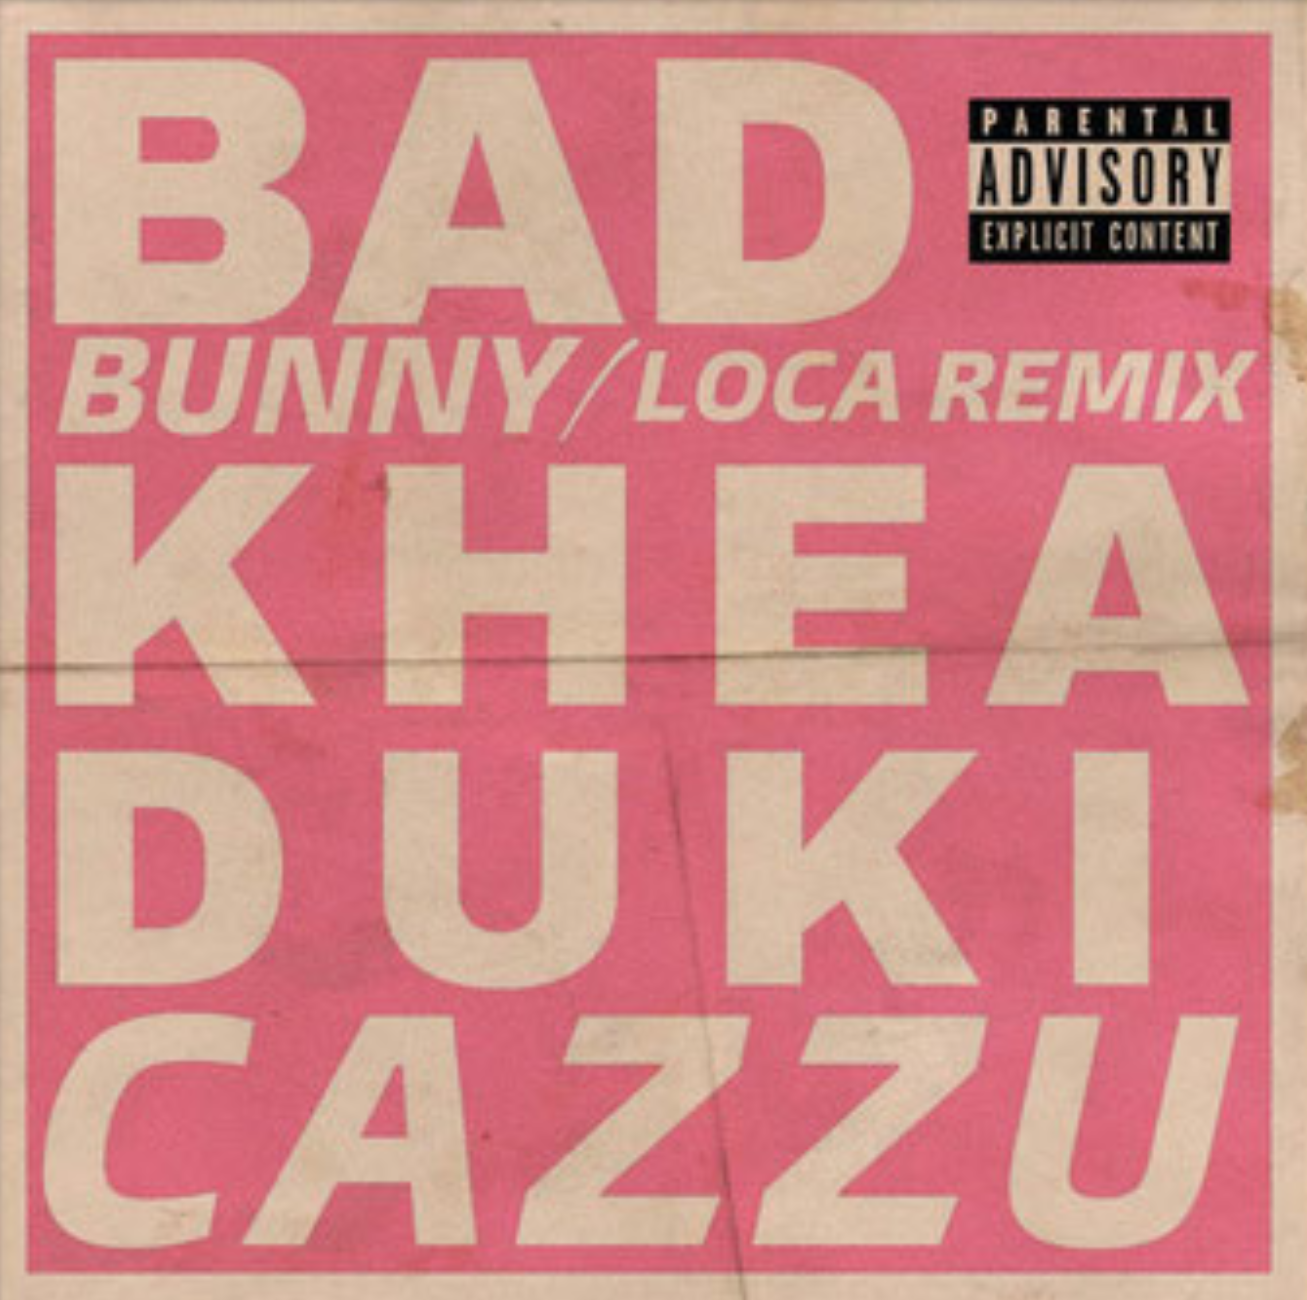 Song Of The Day Khea Loca Remix Featuring Bad Bunny Duki